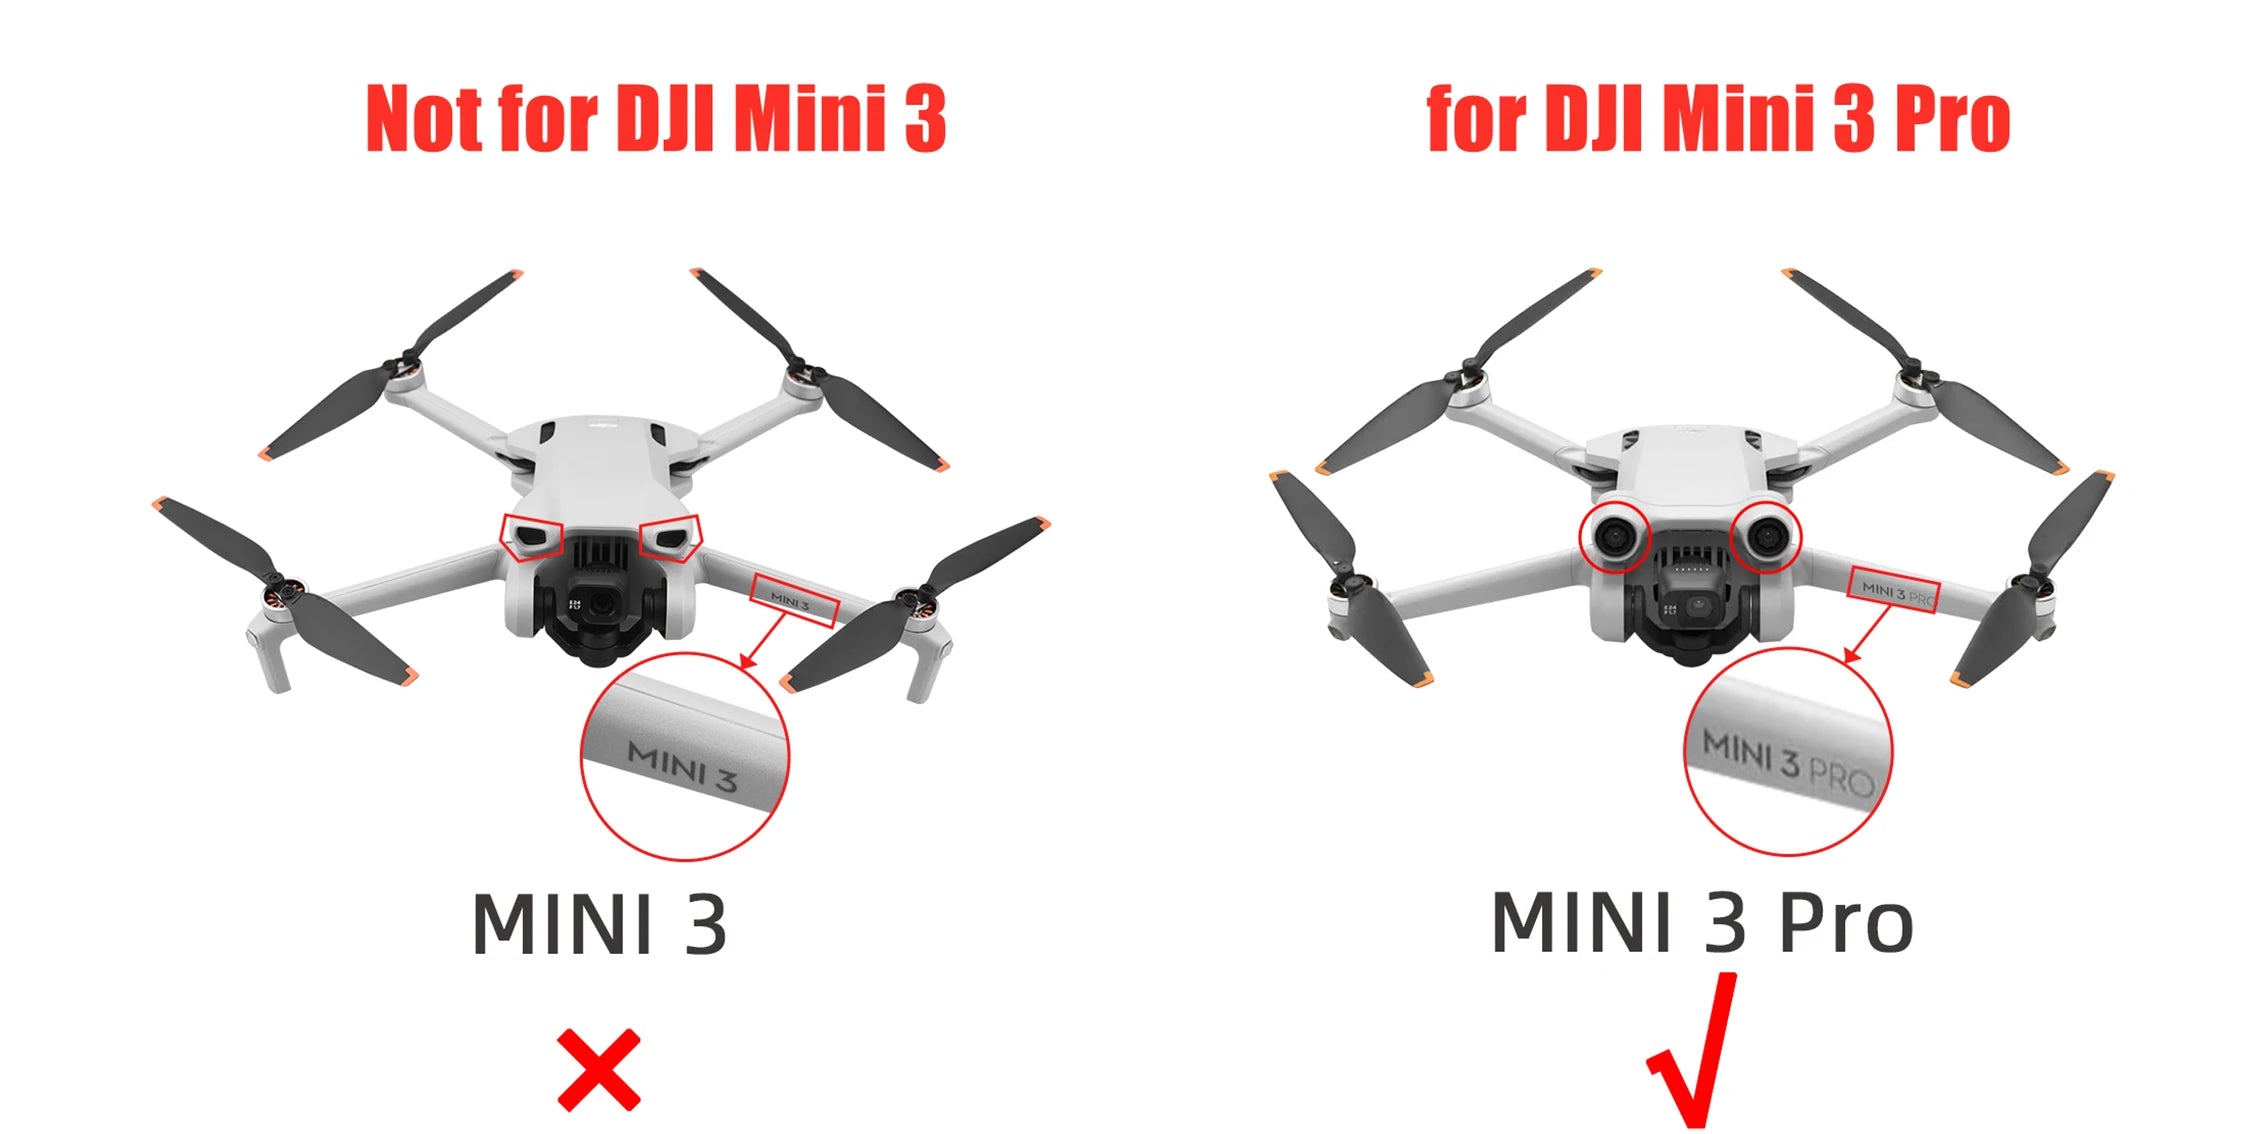 Storage Bag for DJI MINI 3 PRO, case design to protect your drone and accessories from accidental bumps, dents and scratches .